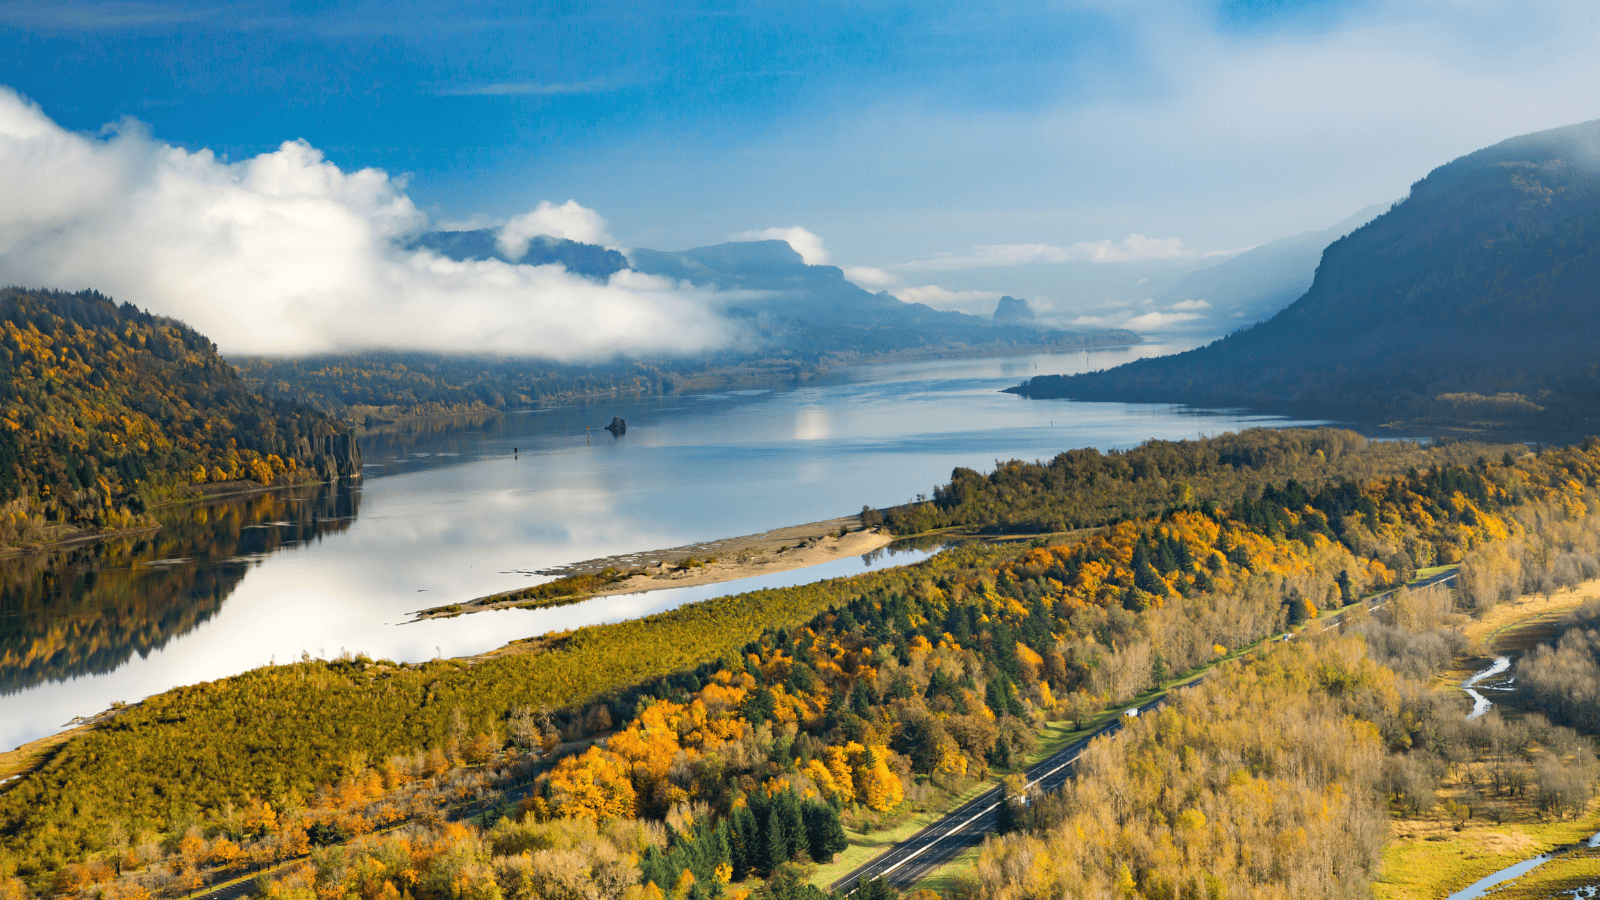 <p>See some of Oregon and Washington’s most picturesque regions on a <a href="https://www.americancruiselines.com/cruises/columbia-and-snake-river-cruises/columbia-and-snake-rivers-cruise" rel="nofollow external noopener noreferrer">Columbia & Snake Rivers</a> cruise. American Cruise Lines operates this eight-night voyage through lush <a href="https://whatthefab.com/pacific-northwest.html" rel="follow">areas of the Pacific Northwest</a>. Ships traverse the rivers between Portland, Oregon, and Clarkston, Washington, providing unique views.</p><p>The Columbia & Snake Rivers tour highlights legendary American landscapes, from thick forests to towering waterfalls. Guests can learn about famous areas like Mount St. Helens and Multnomah Falls from local guides and continue their experience with onboard presentations. </p>